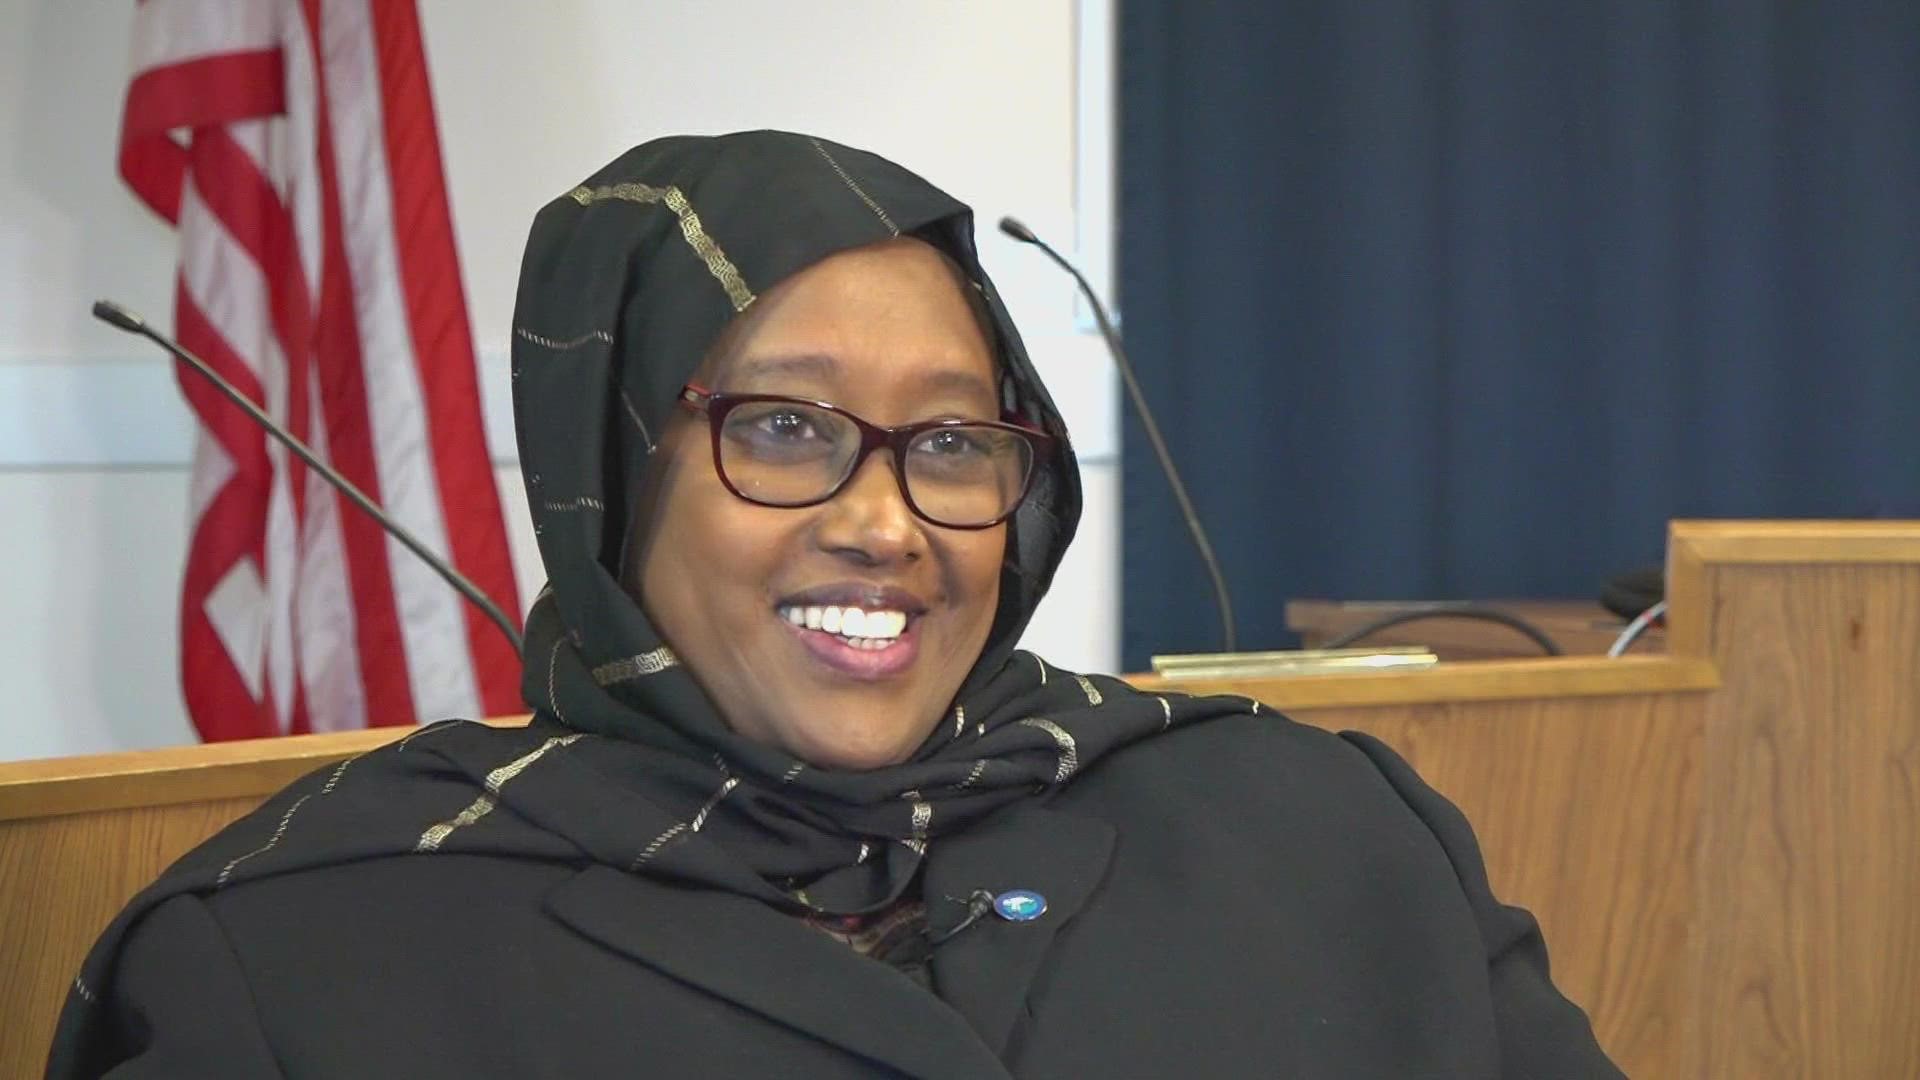 She is the first Somali American Mayor in the country, and the first woman of color to serve as mayor of South Portland.